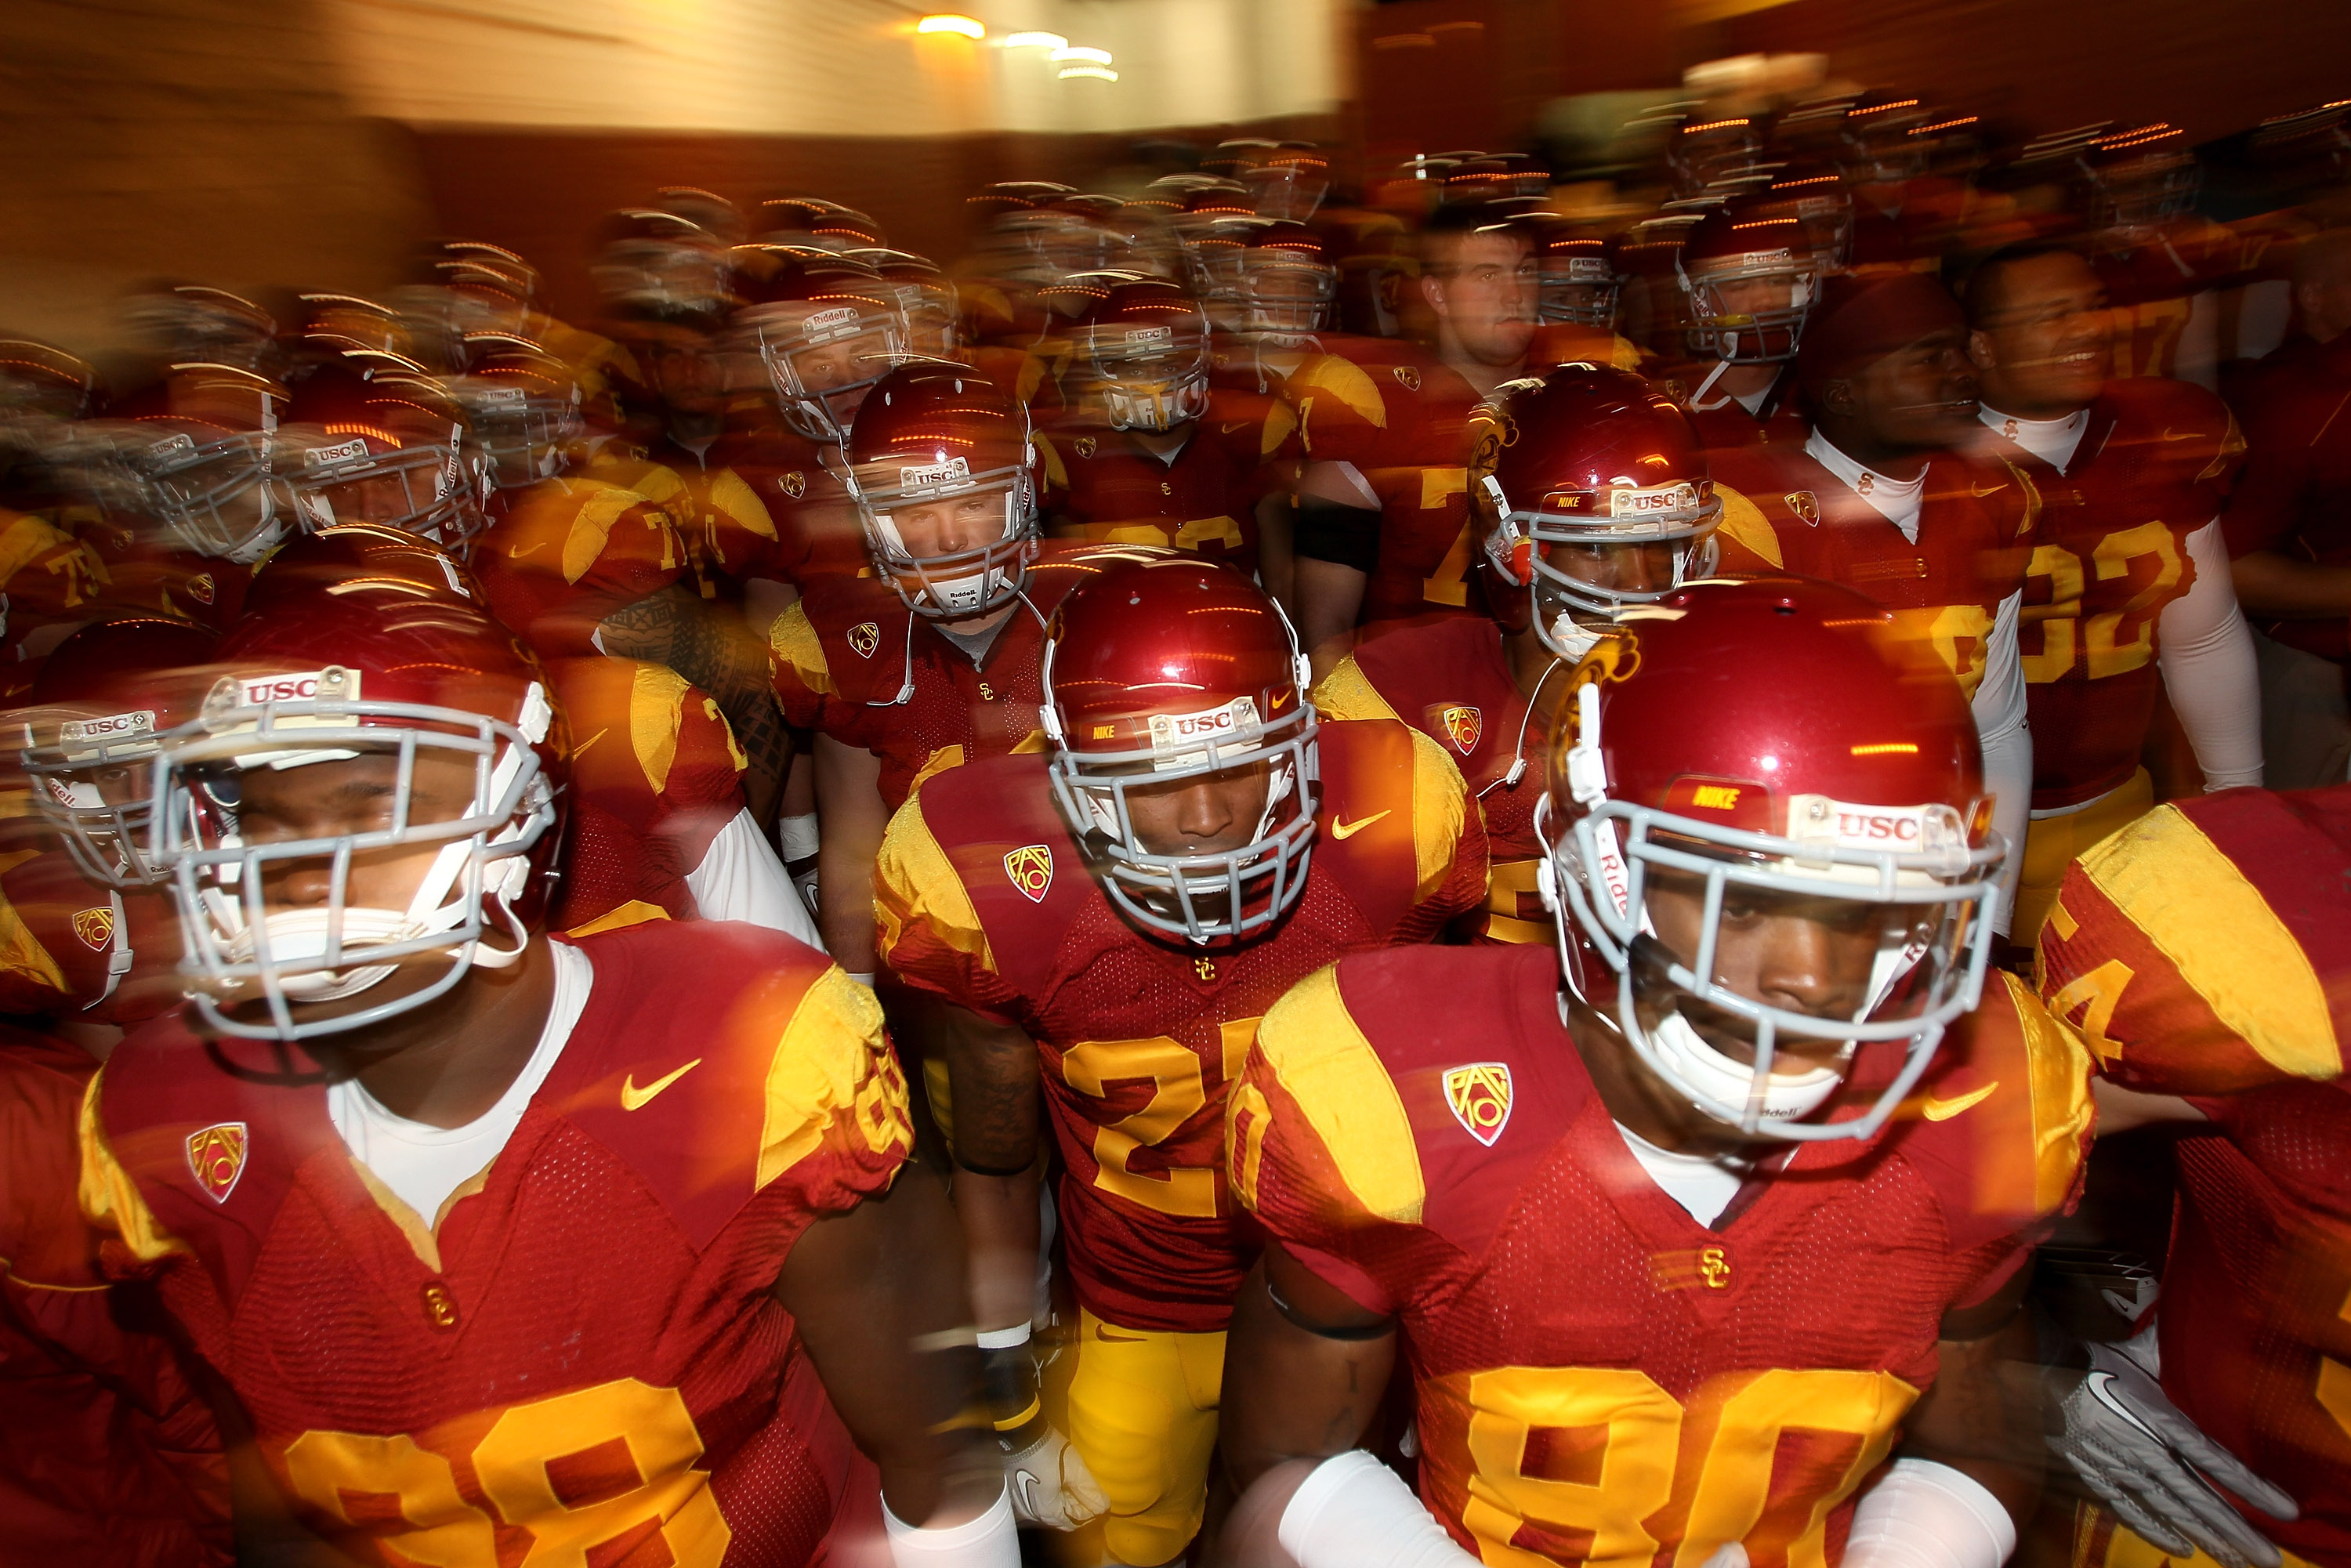 LOS ANGELES, CA - NOVEMBER 27:  The USC Trojans come through the tunnel to the field before the game with the Notre Dame Fighting Irish at the Los Angeles Memorial Coliseum on November 27, 2010 in Los Angeles, California. Notre Dame won 20-16.  (Photo by